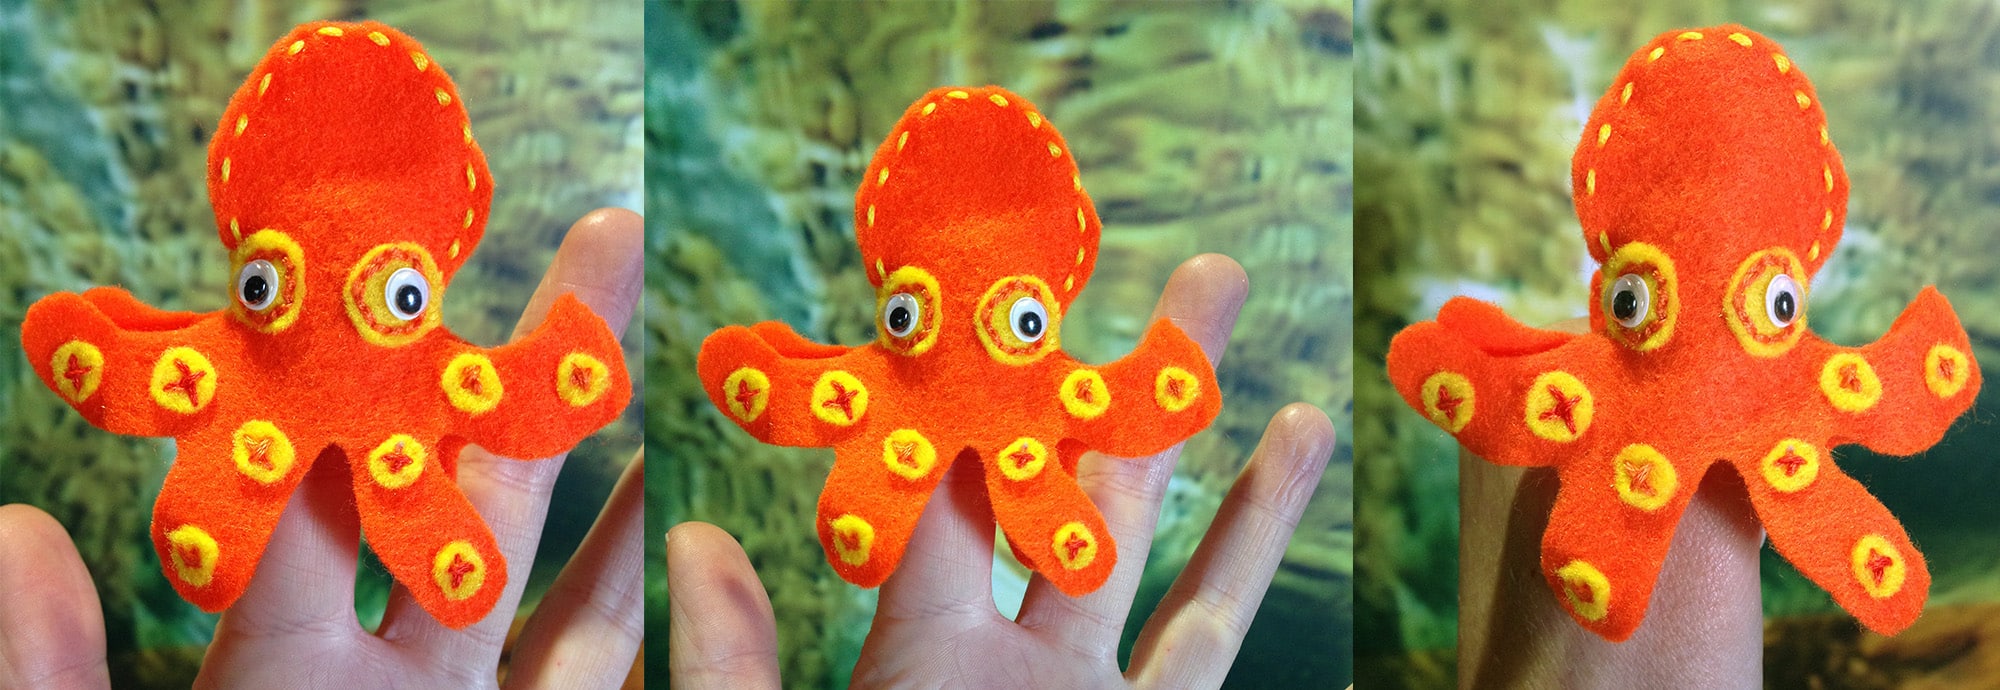 Series of three photos of an octopus finger puppet made from orange and yellow fabric.